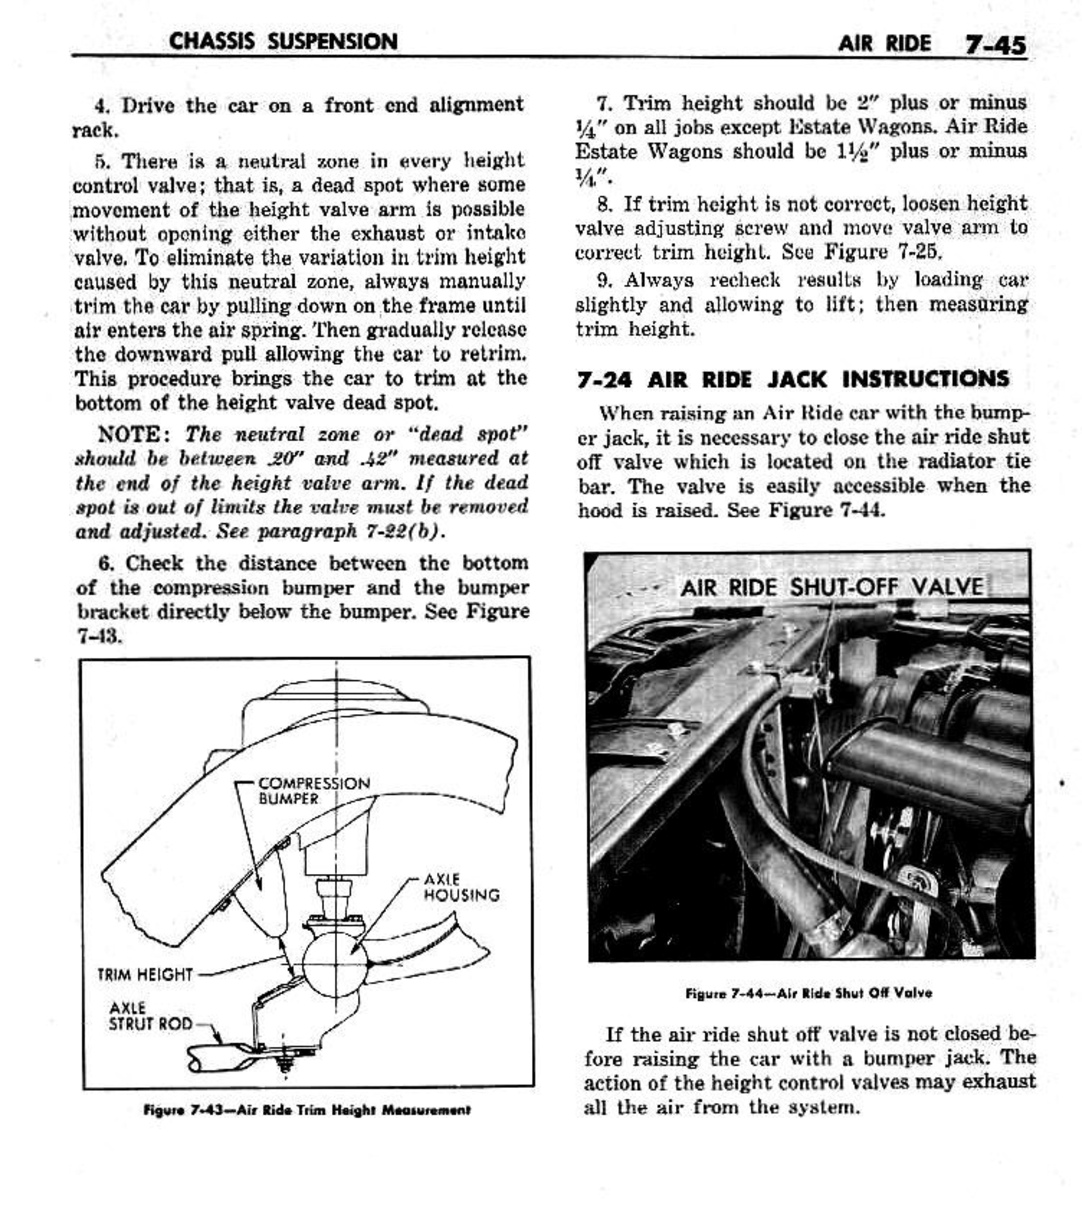 n_08 1959 Buick Shop Manual - Chassis Suspension-045-045.jpg